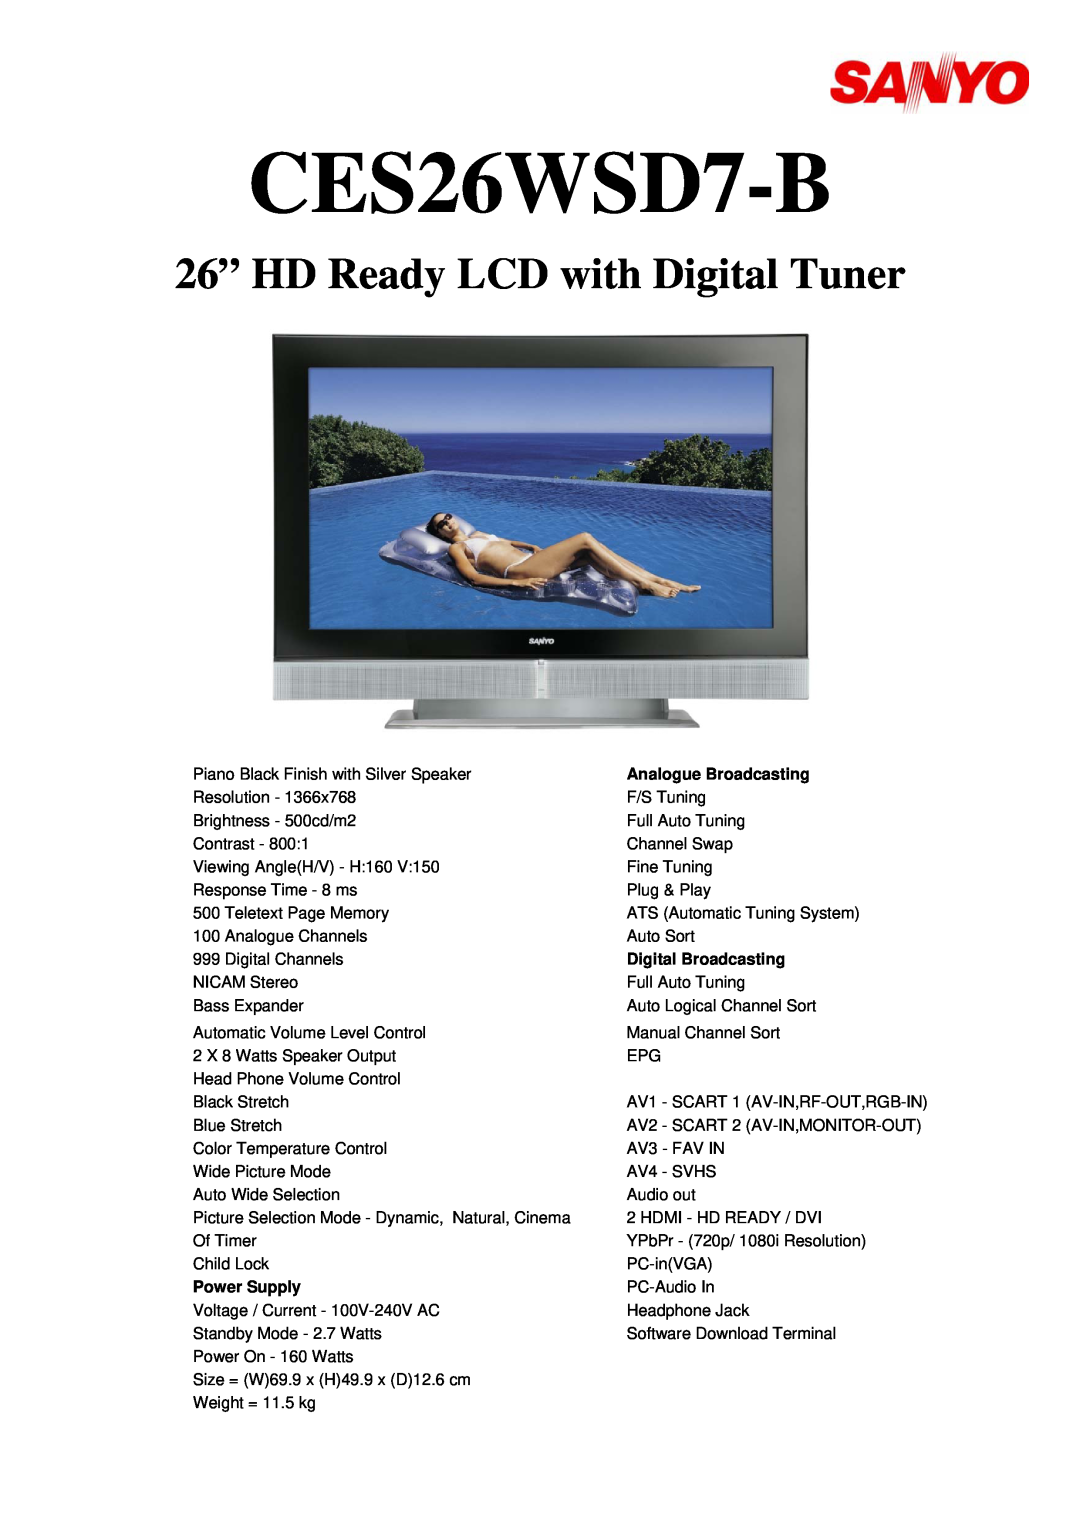 Sanyo CES26WSD7-B manual 26” HD Ready LCD with Digital Tuner, Power Supply, Analogue Broadcasting, Digital Broadcasting 